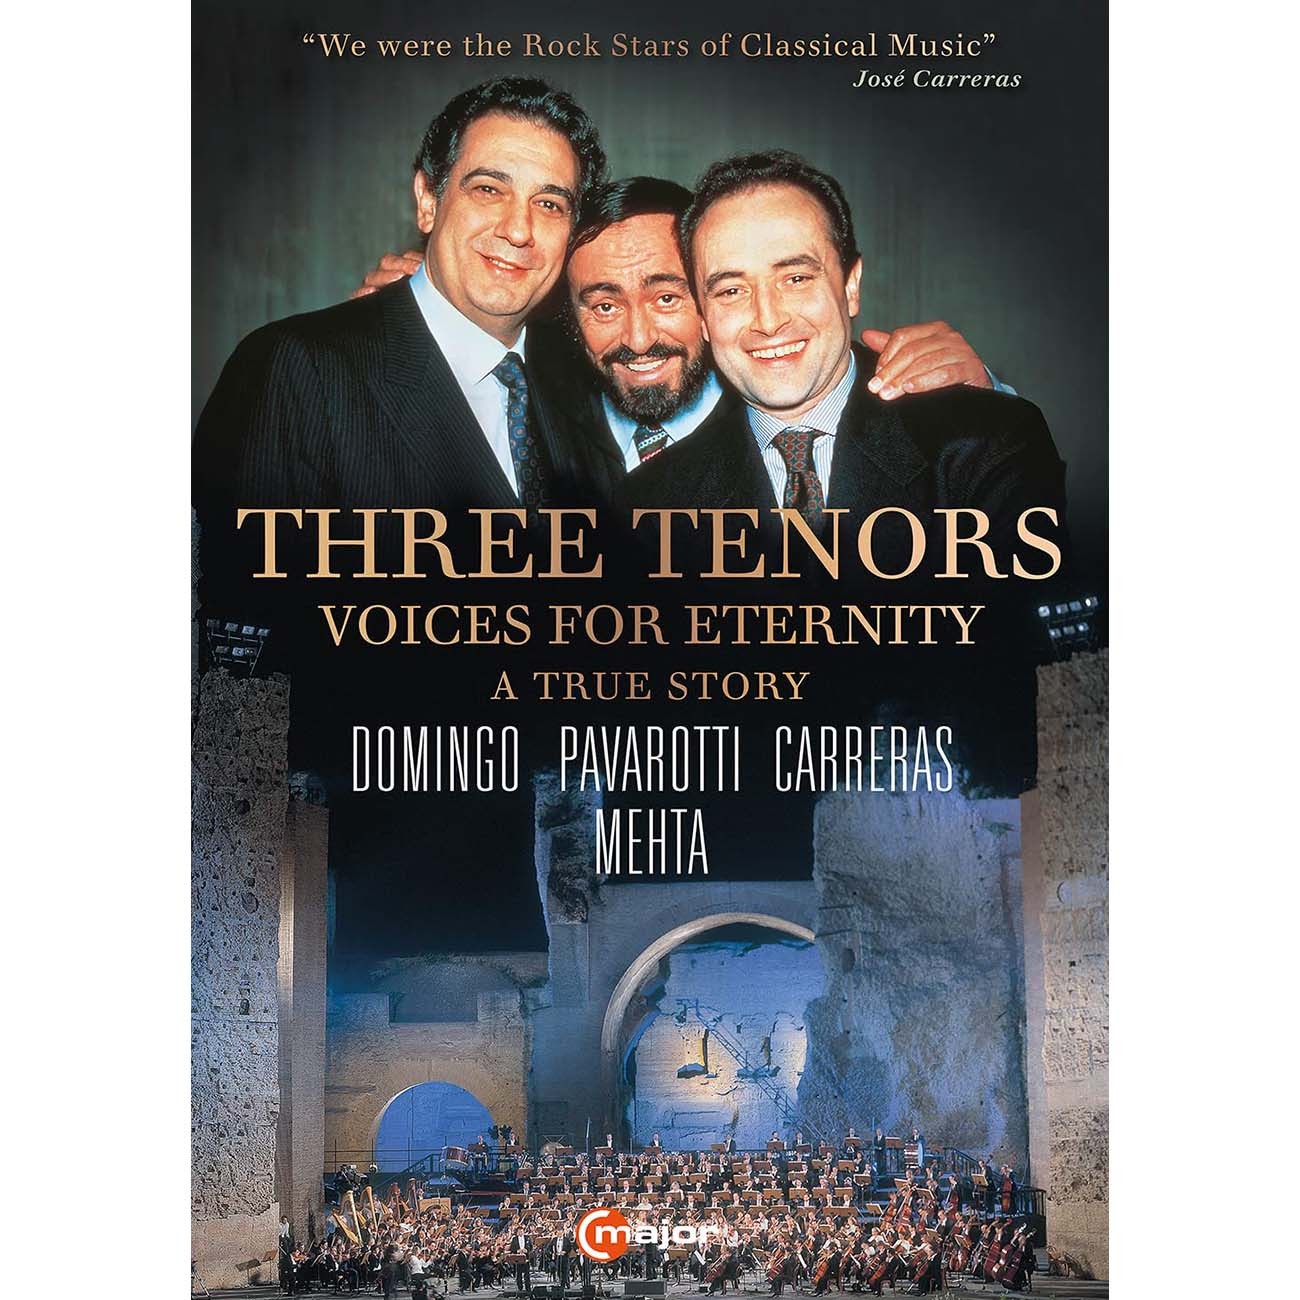 Three Tenors: Voices for Eternity (Documentary Film) | DVDS & BLU-RAYS |  Met Opera Shop